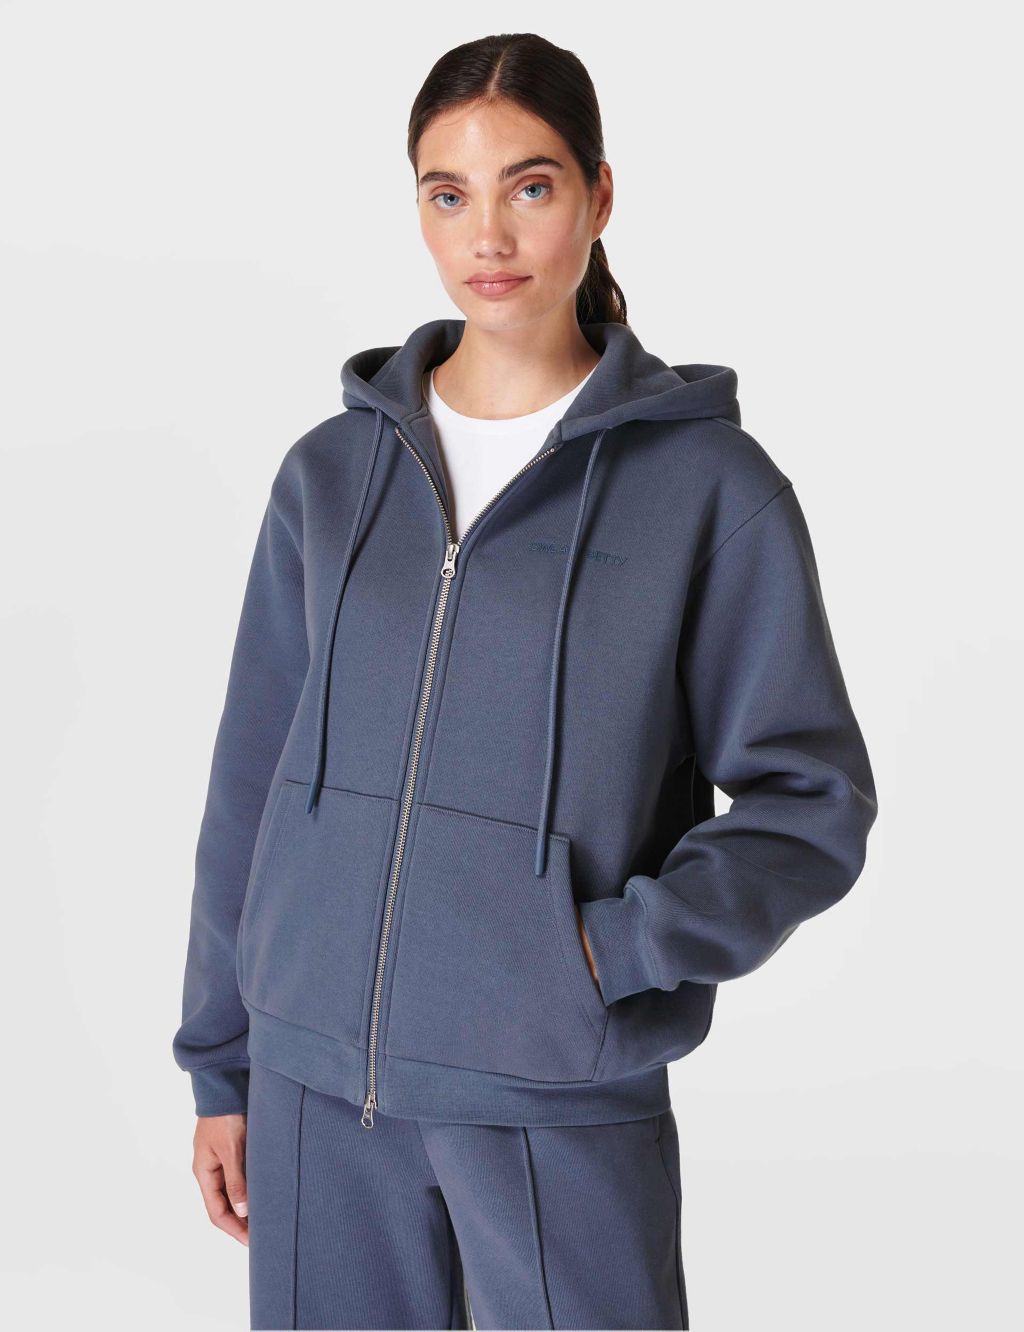 Elevated Cotton Rich Zip Up Hoodie image 1